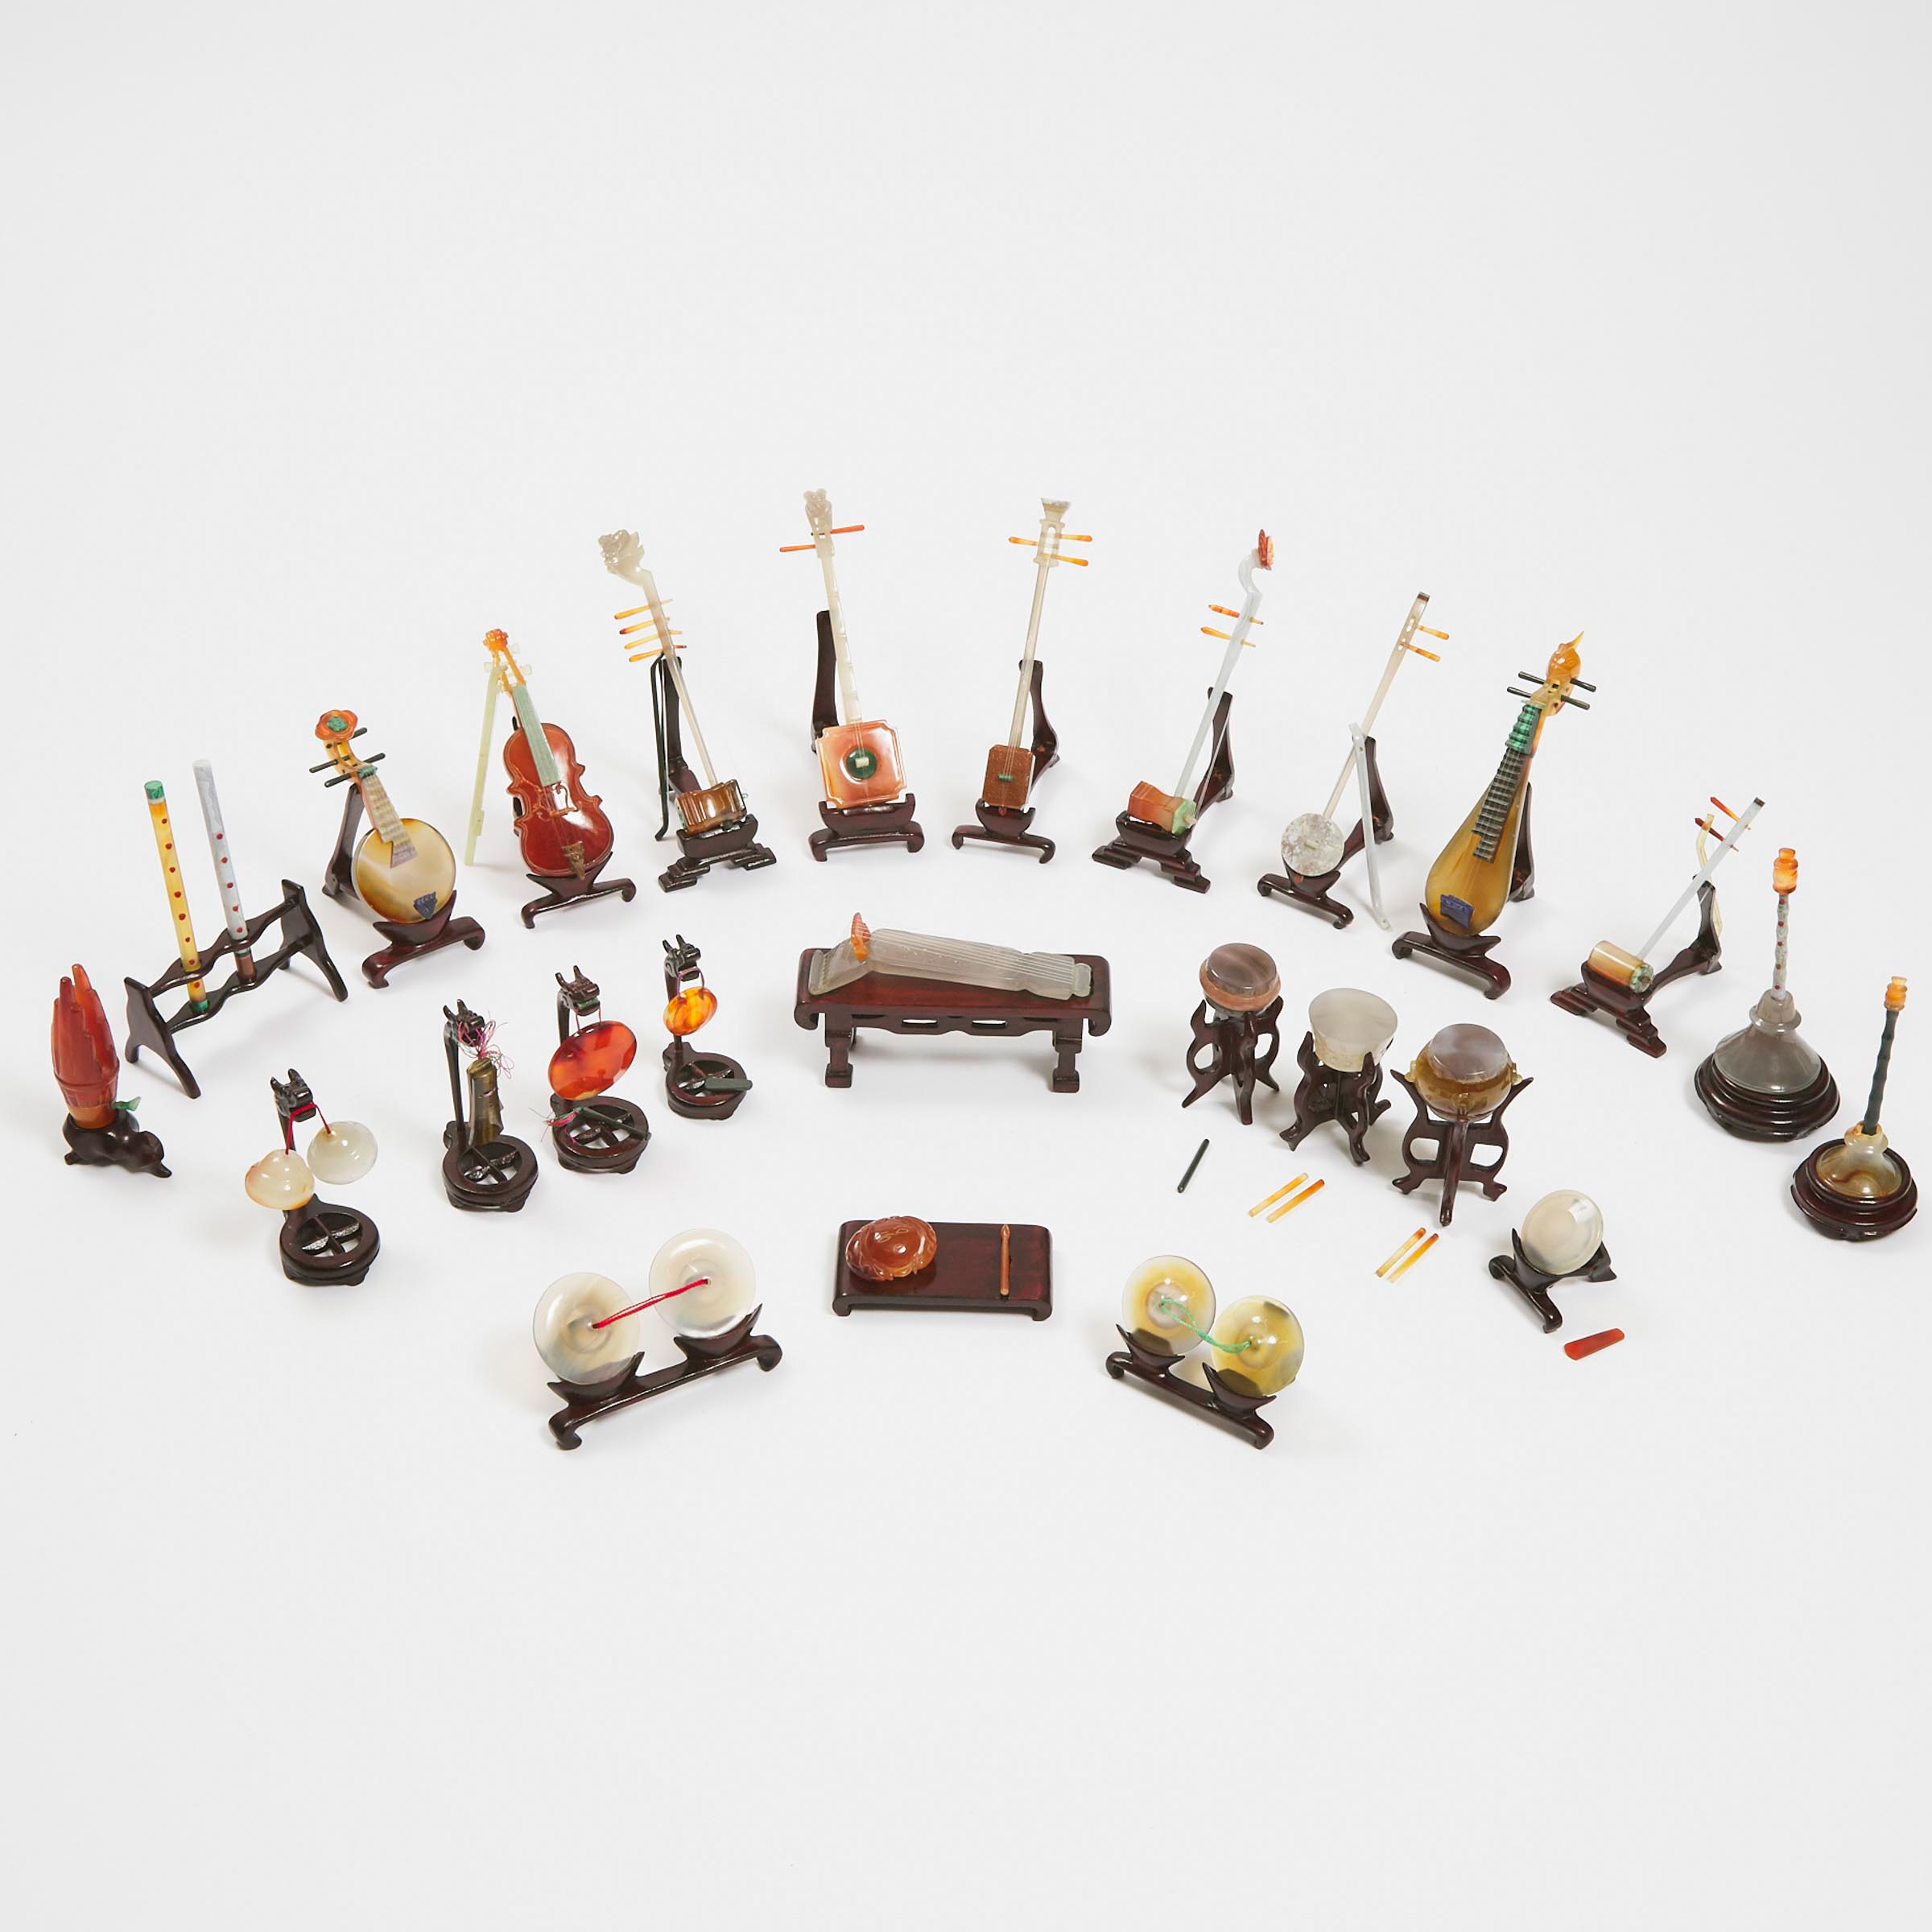 A Set of Twenty-Six Agate and Hardstone Miniature Models of Musical Instruments, Republican Period, Early 20th Century